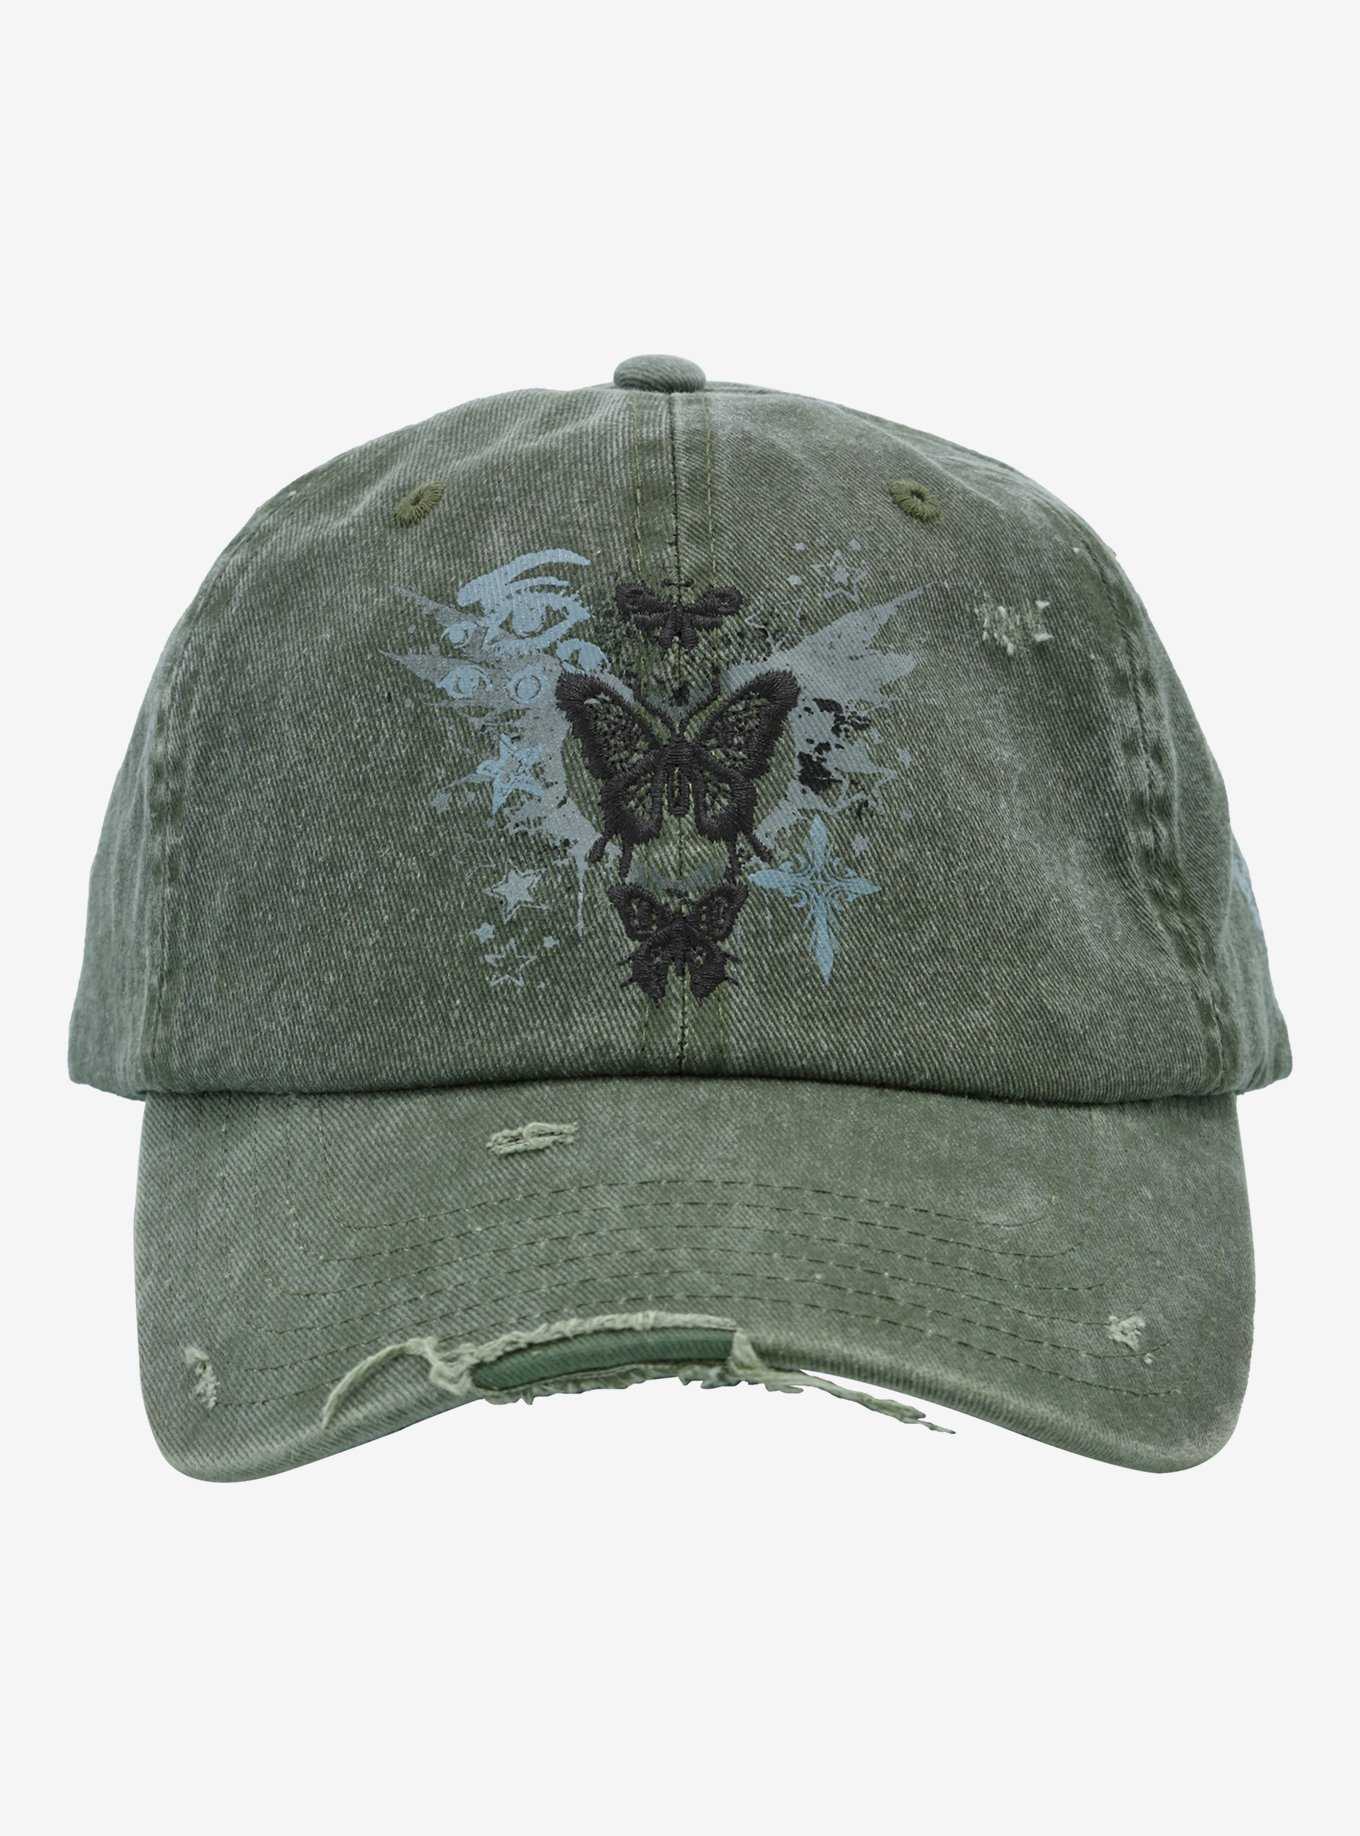 Butterfly Grunge Distressed Dad Cap, , hi-res